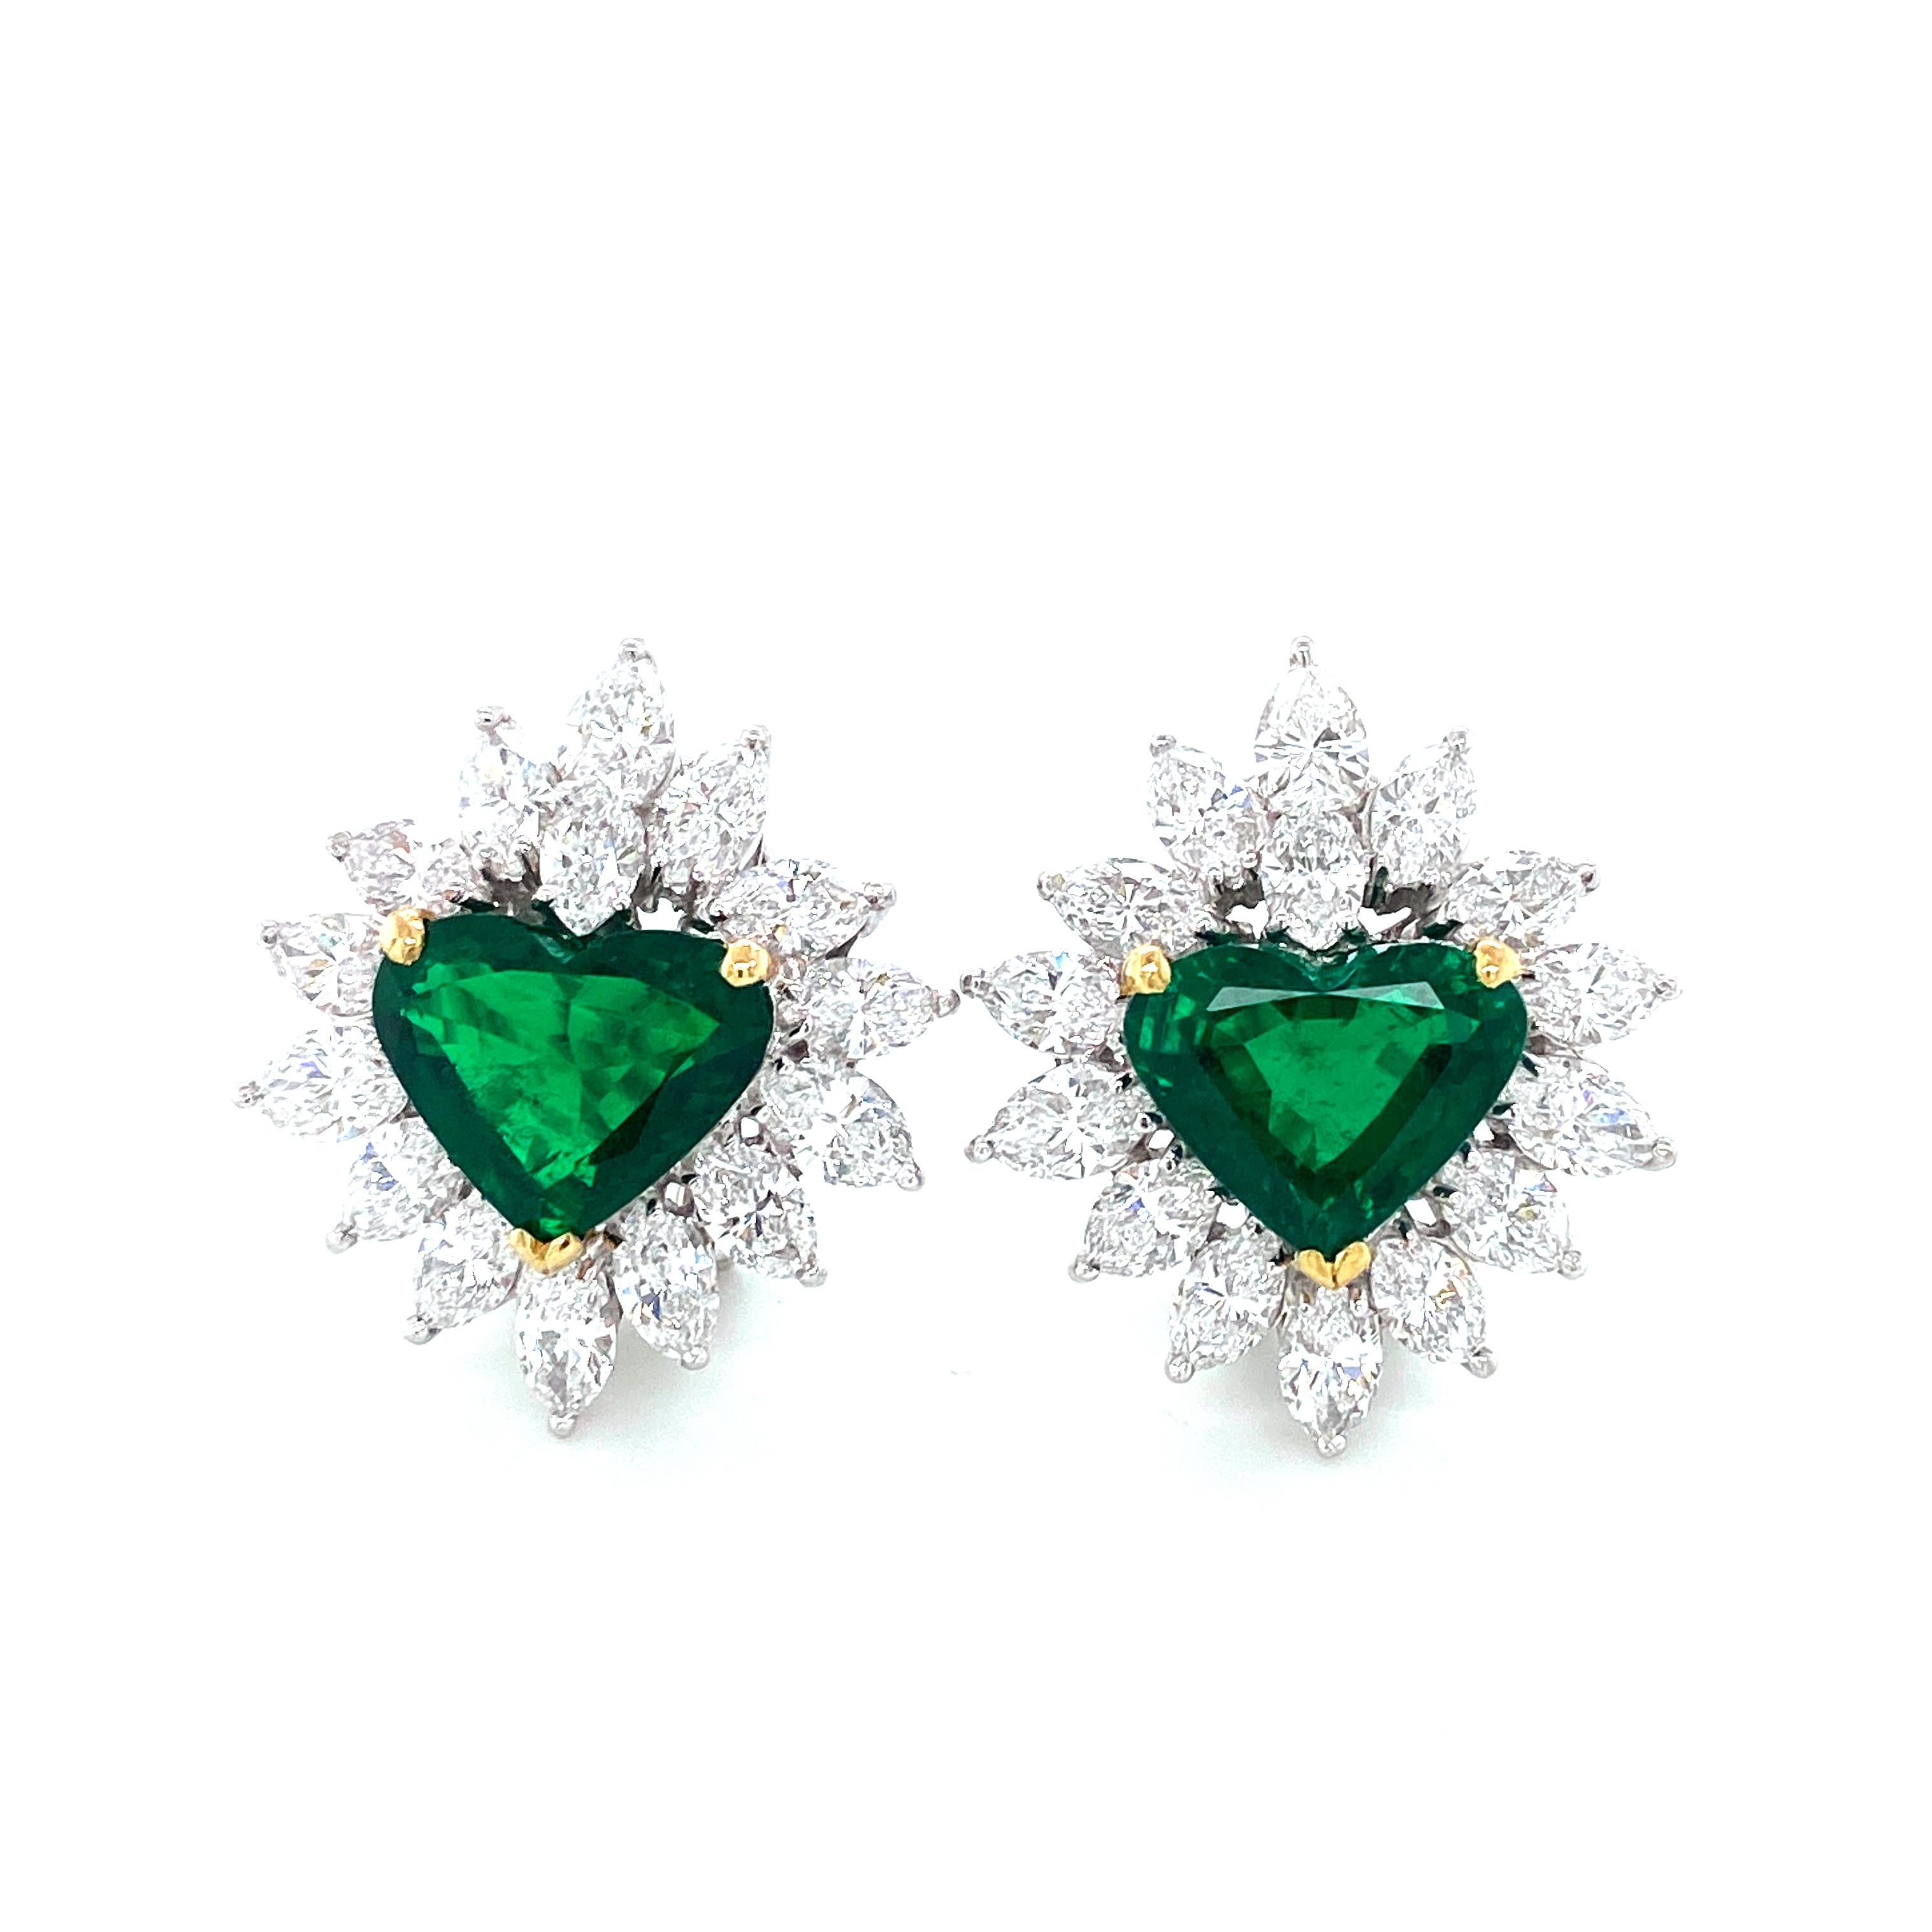 8.34 Carat Gubelin Certified Heart Shaped Emerald and White Diamond Earrings:

A very important earring, it features a pair of stunning Gubelin Lab certified 8.34 carat heart-shaped emerald surrounded by a halo of super-fine white pear and marquise